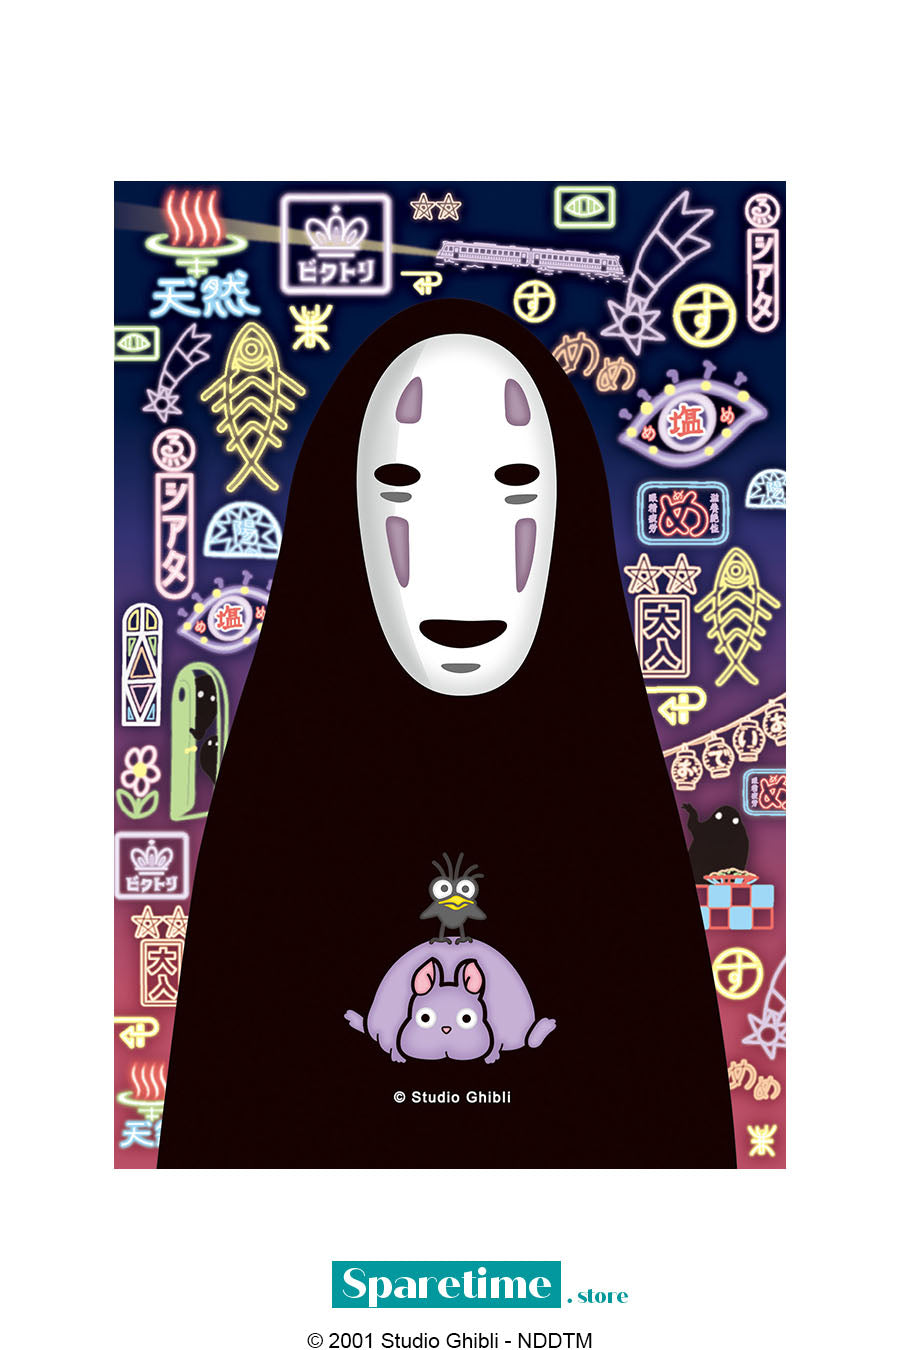 No Face and Mysterious Street Lights "Spirited Away", Ensky Petite Artcrystal Puzzle 126-AC66